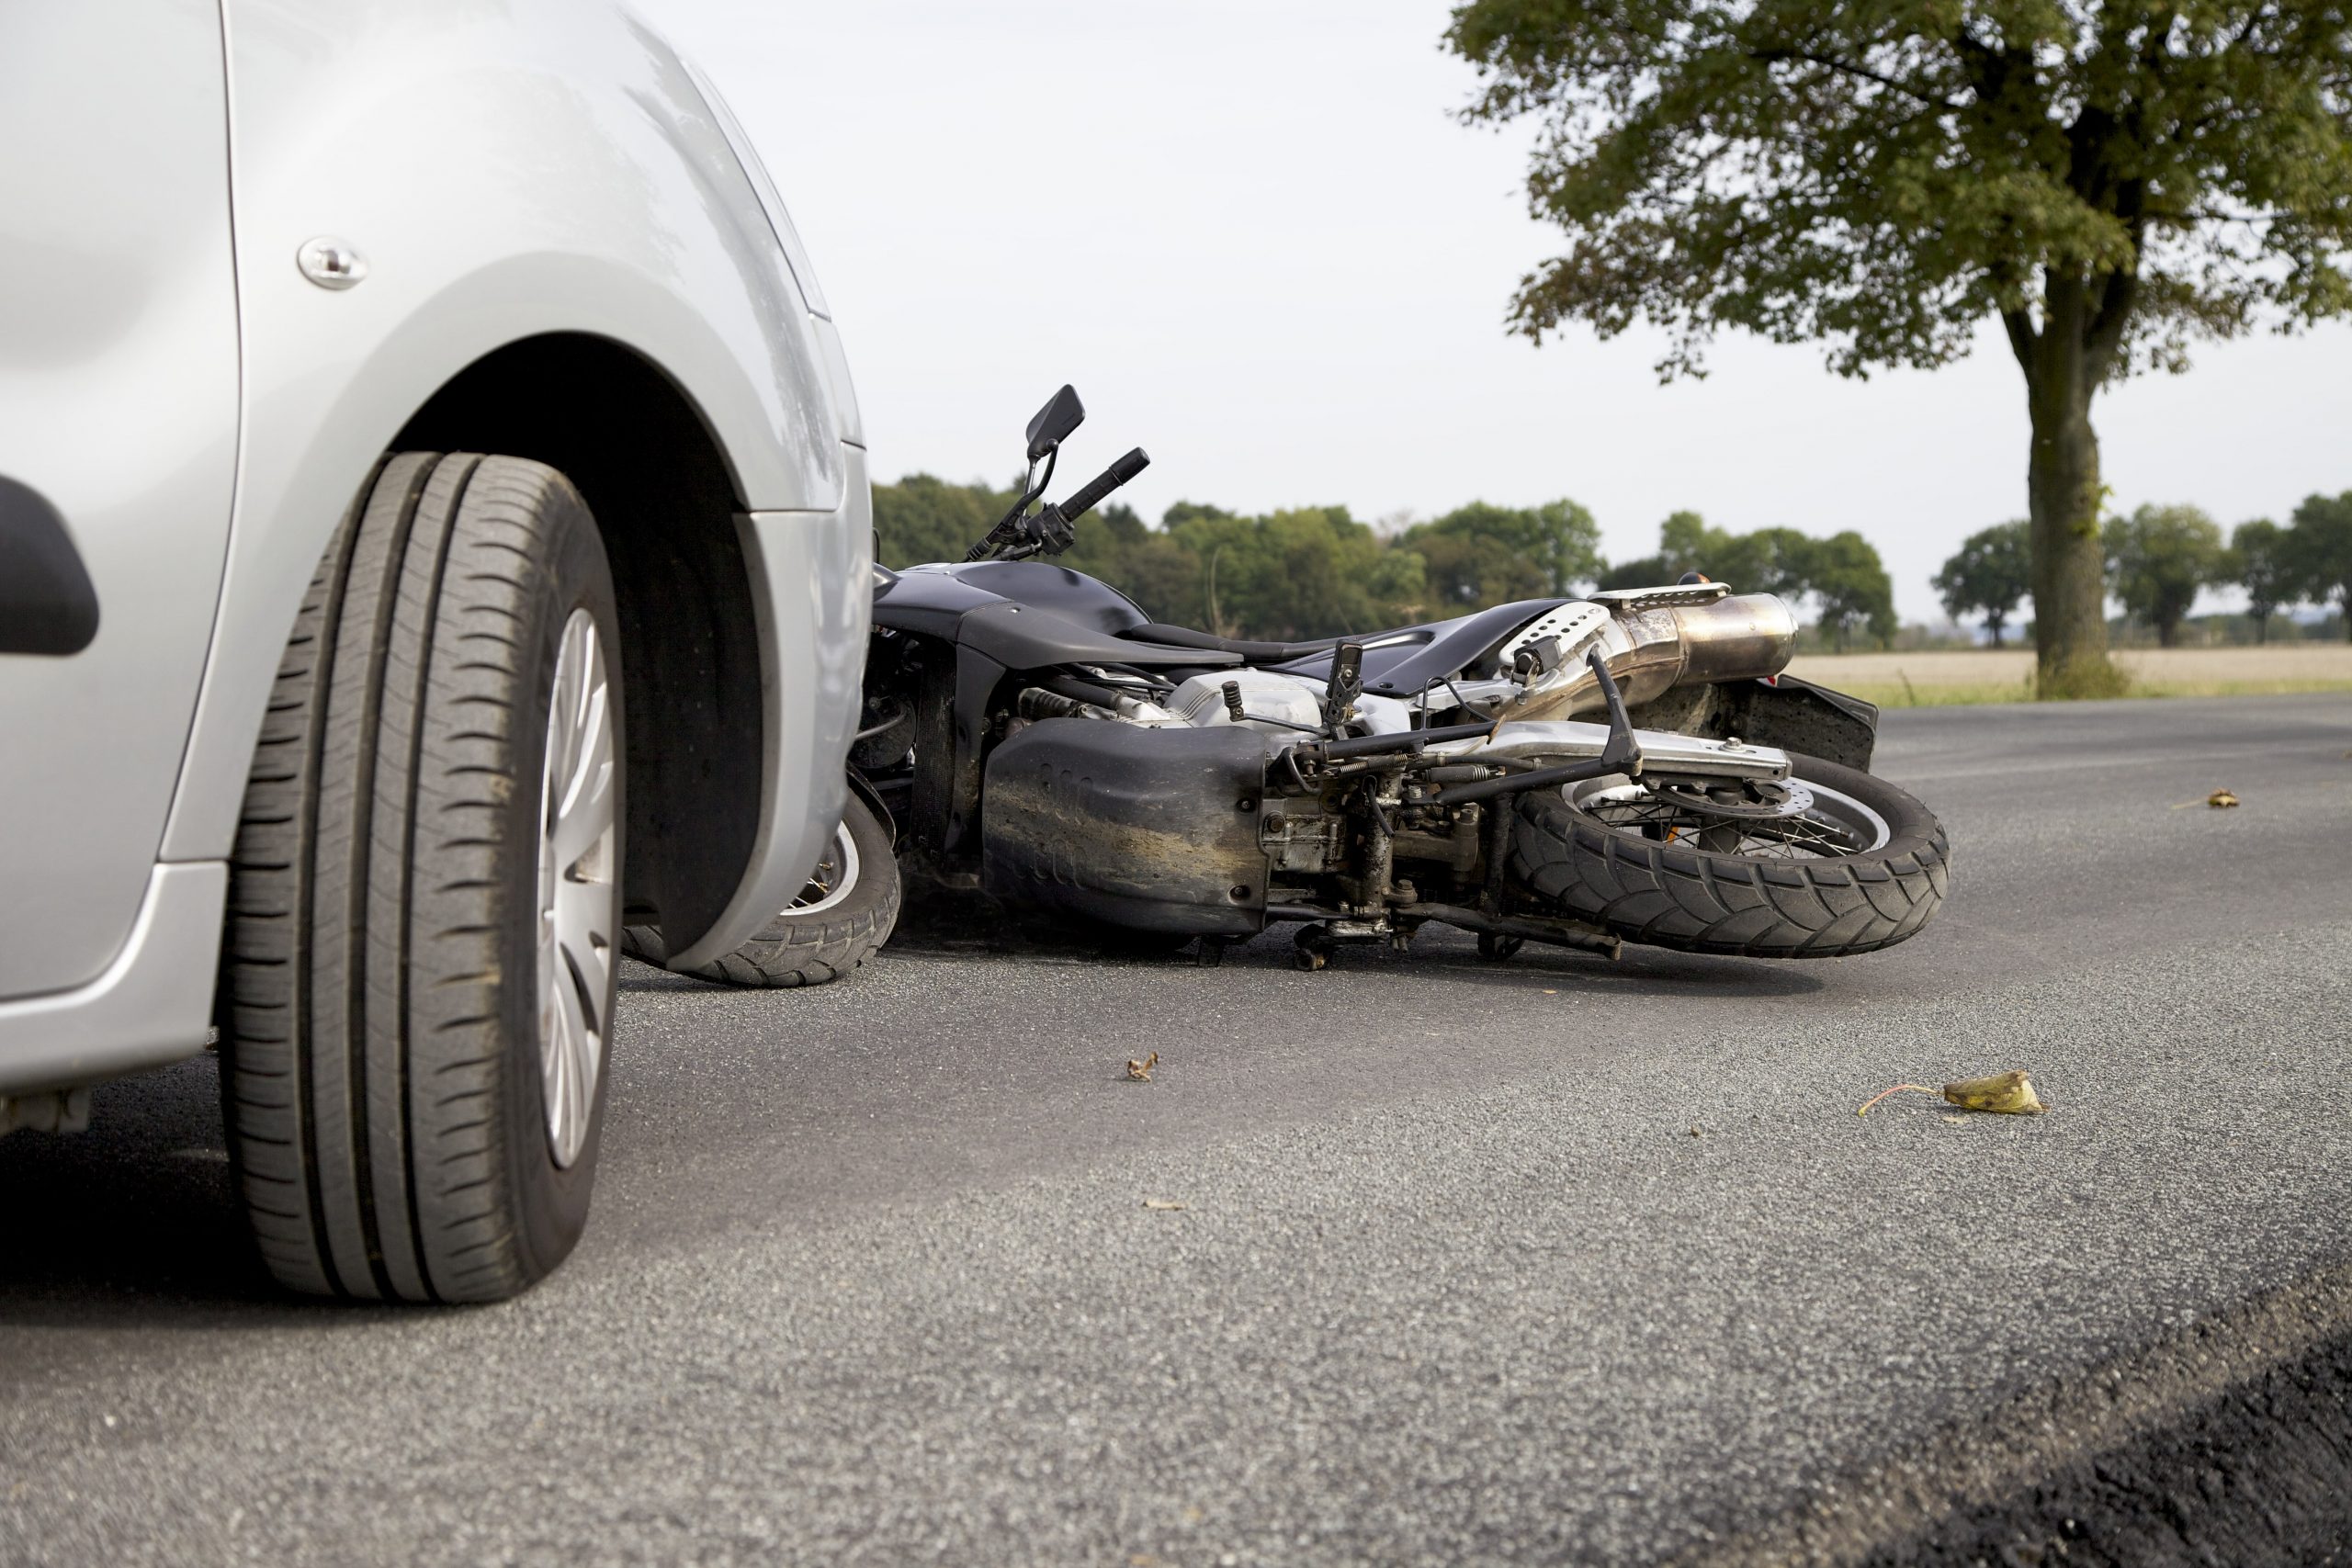 Silver car stopped in the road with a downed unmanned motorcycle in front of it after a crash